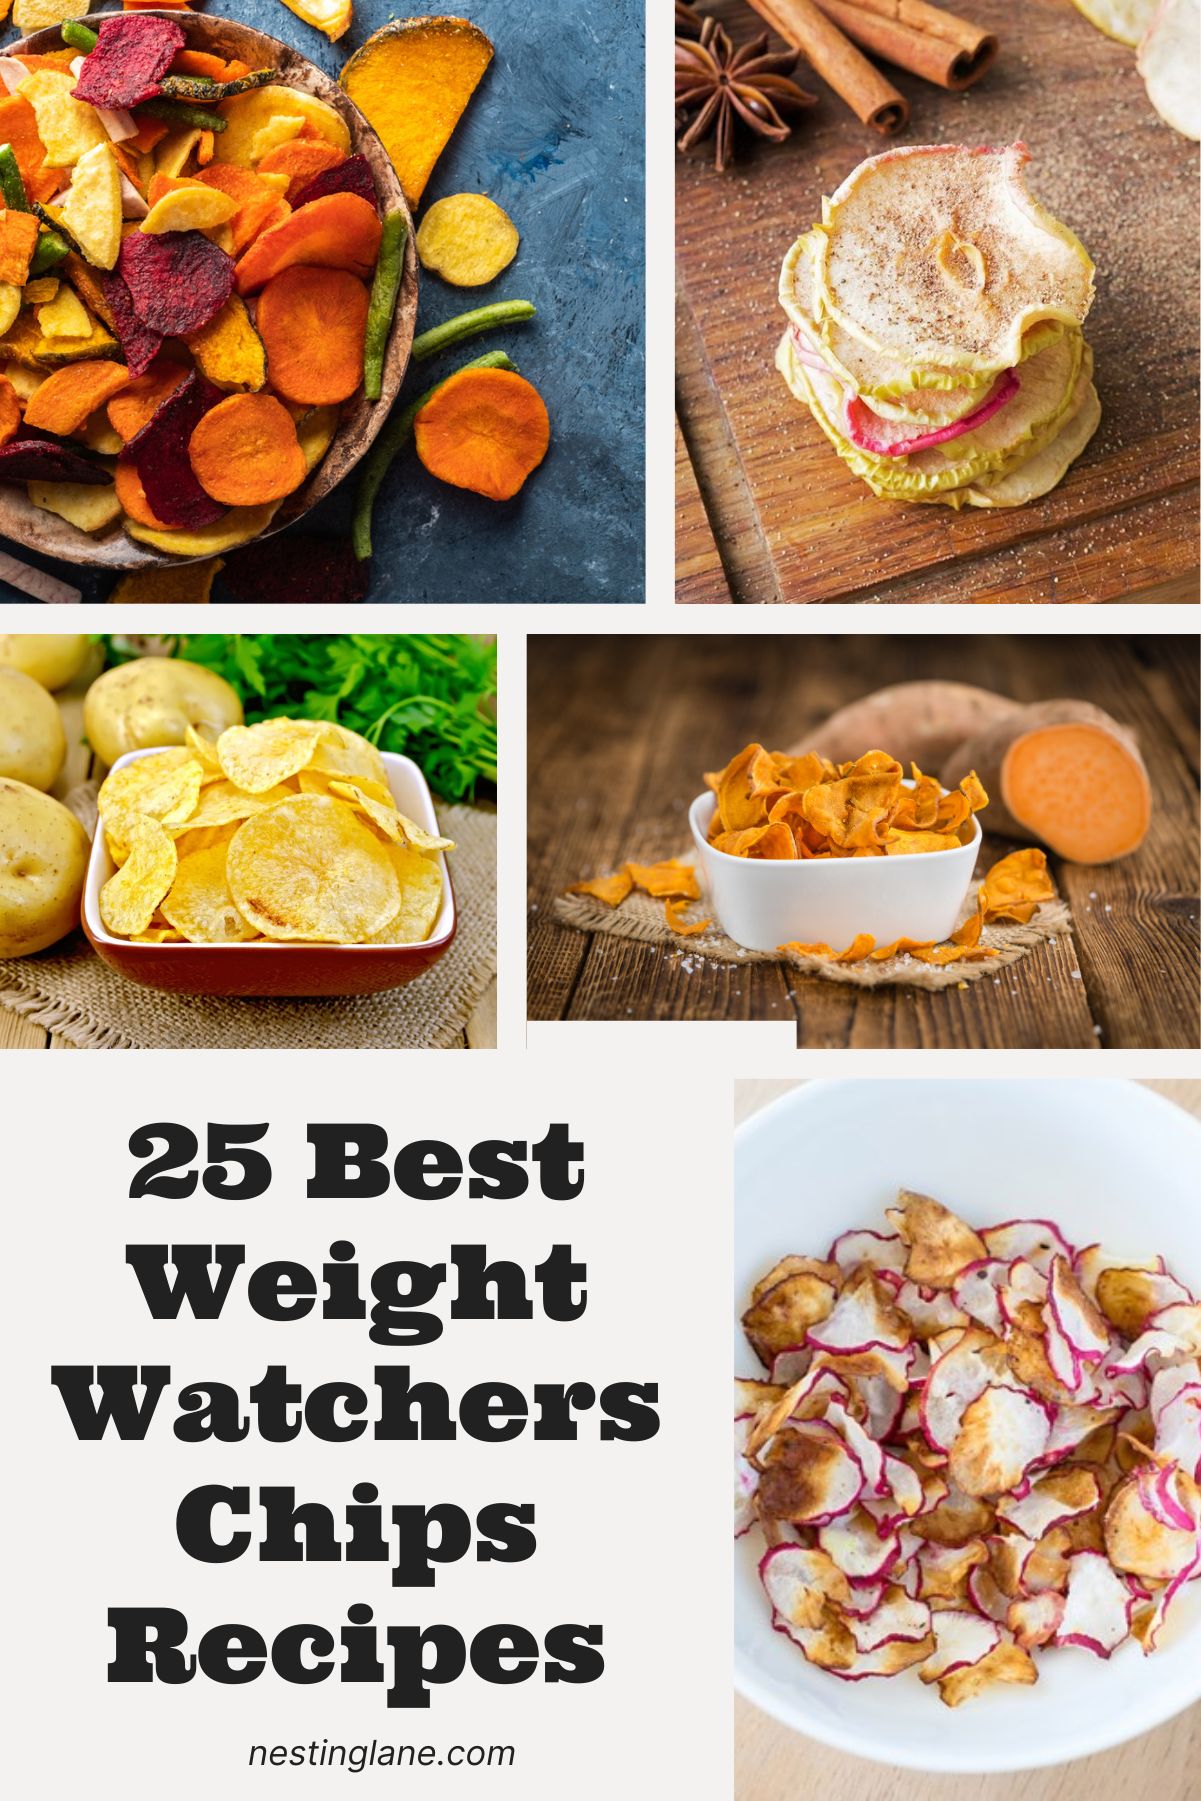 25 Best Weight Watchers Chips Recipes Graphic for Pinterest.